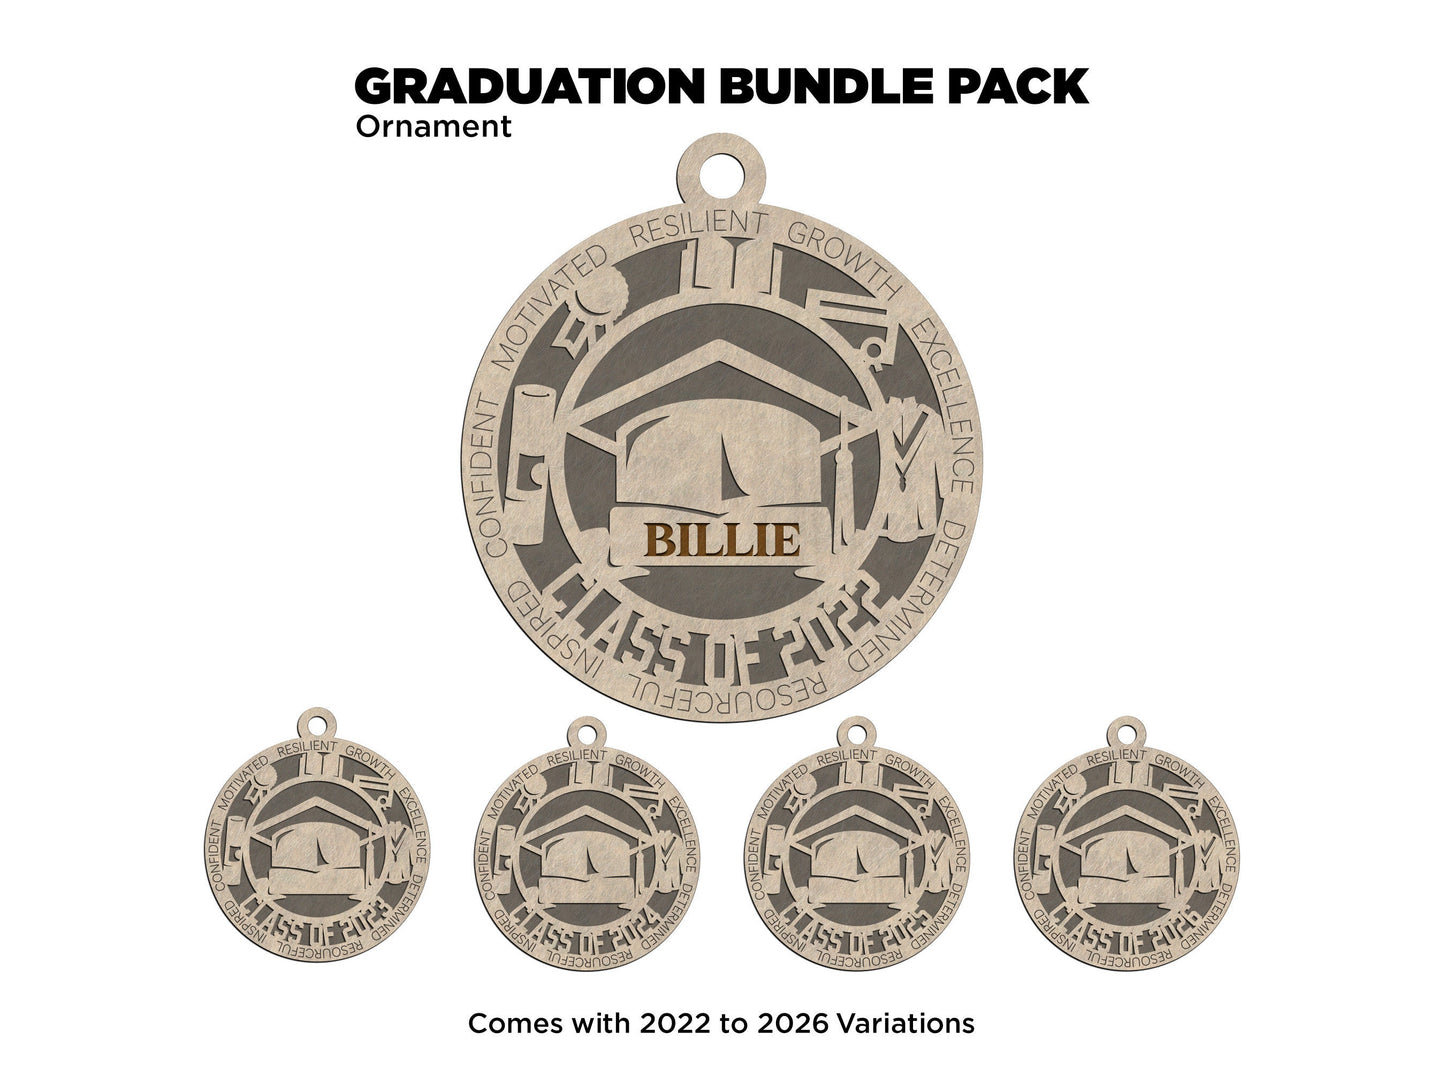 Graduation Product Bundle - Tassel Holder Sign, Ornament, Key Chain, Cake Topper - SVG File Download - Sized & Tested in Glowforge